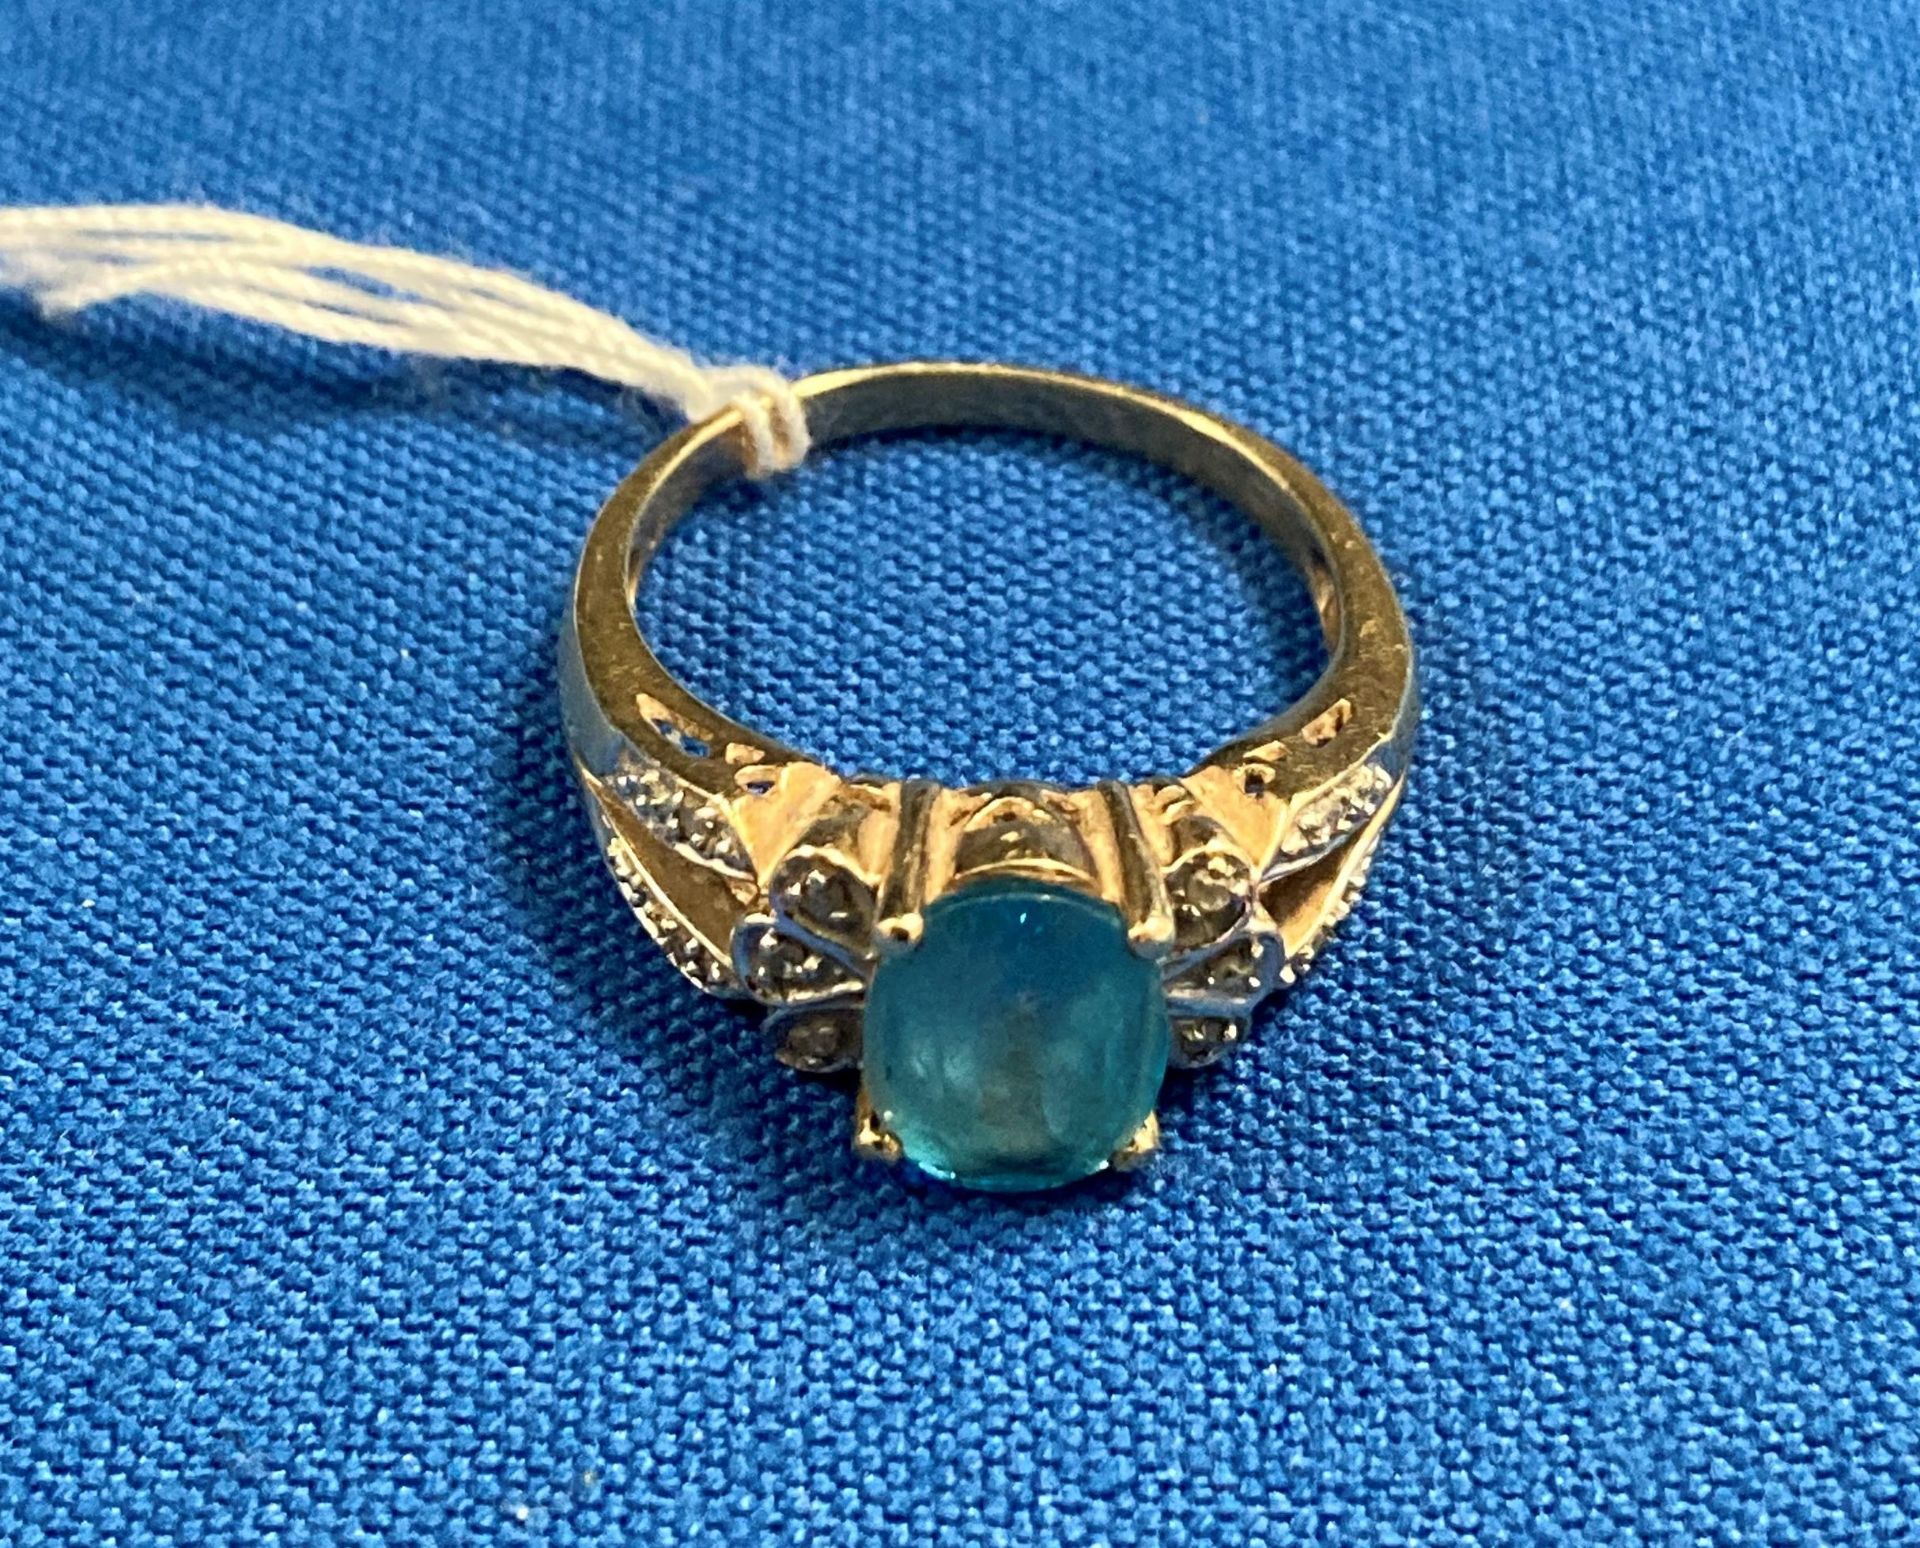 9ct gold (375) with small diamonds and central oval light-blue stone (possibly aquamarine) size Q.